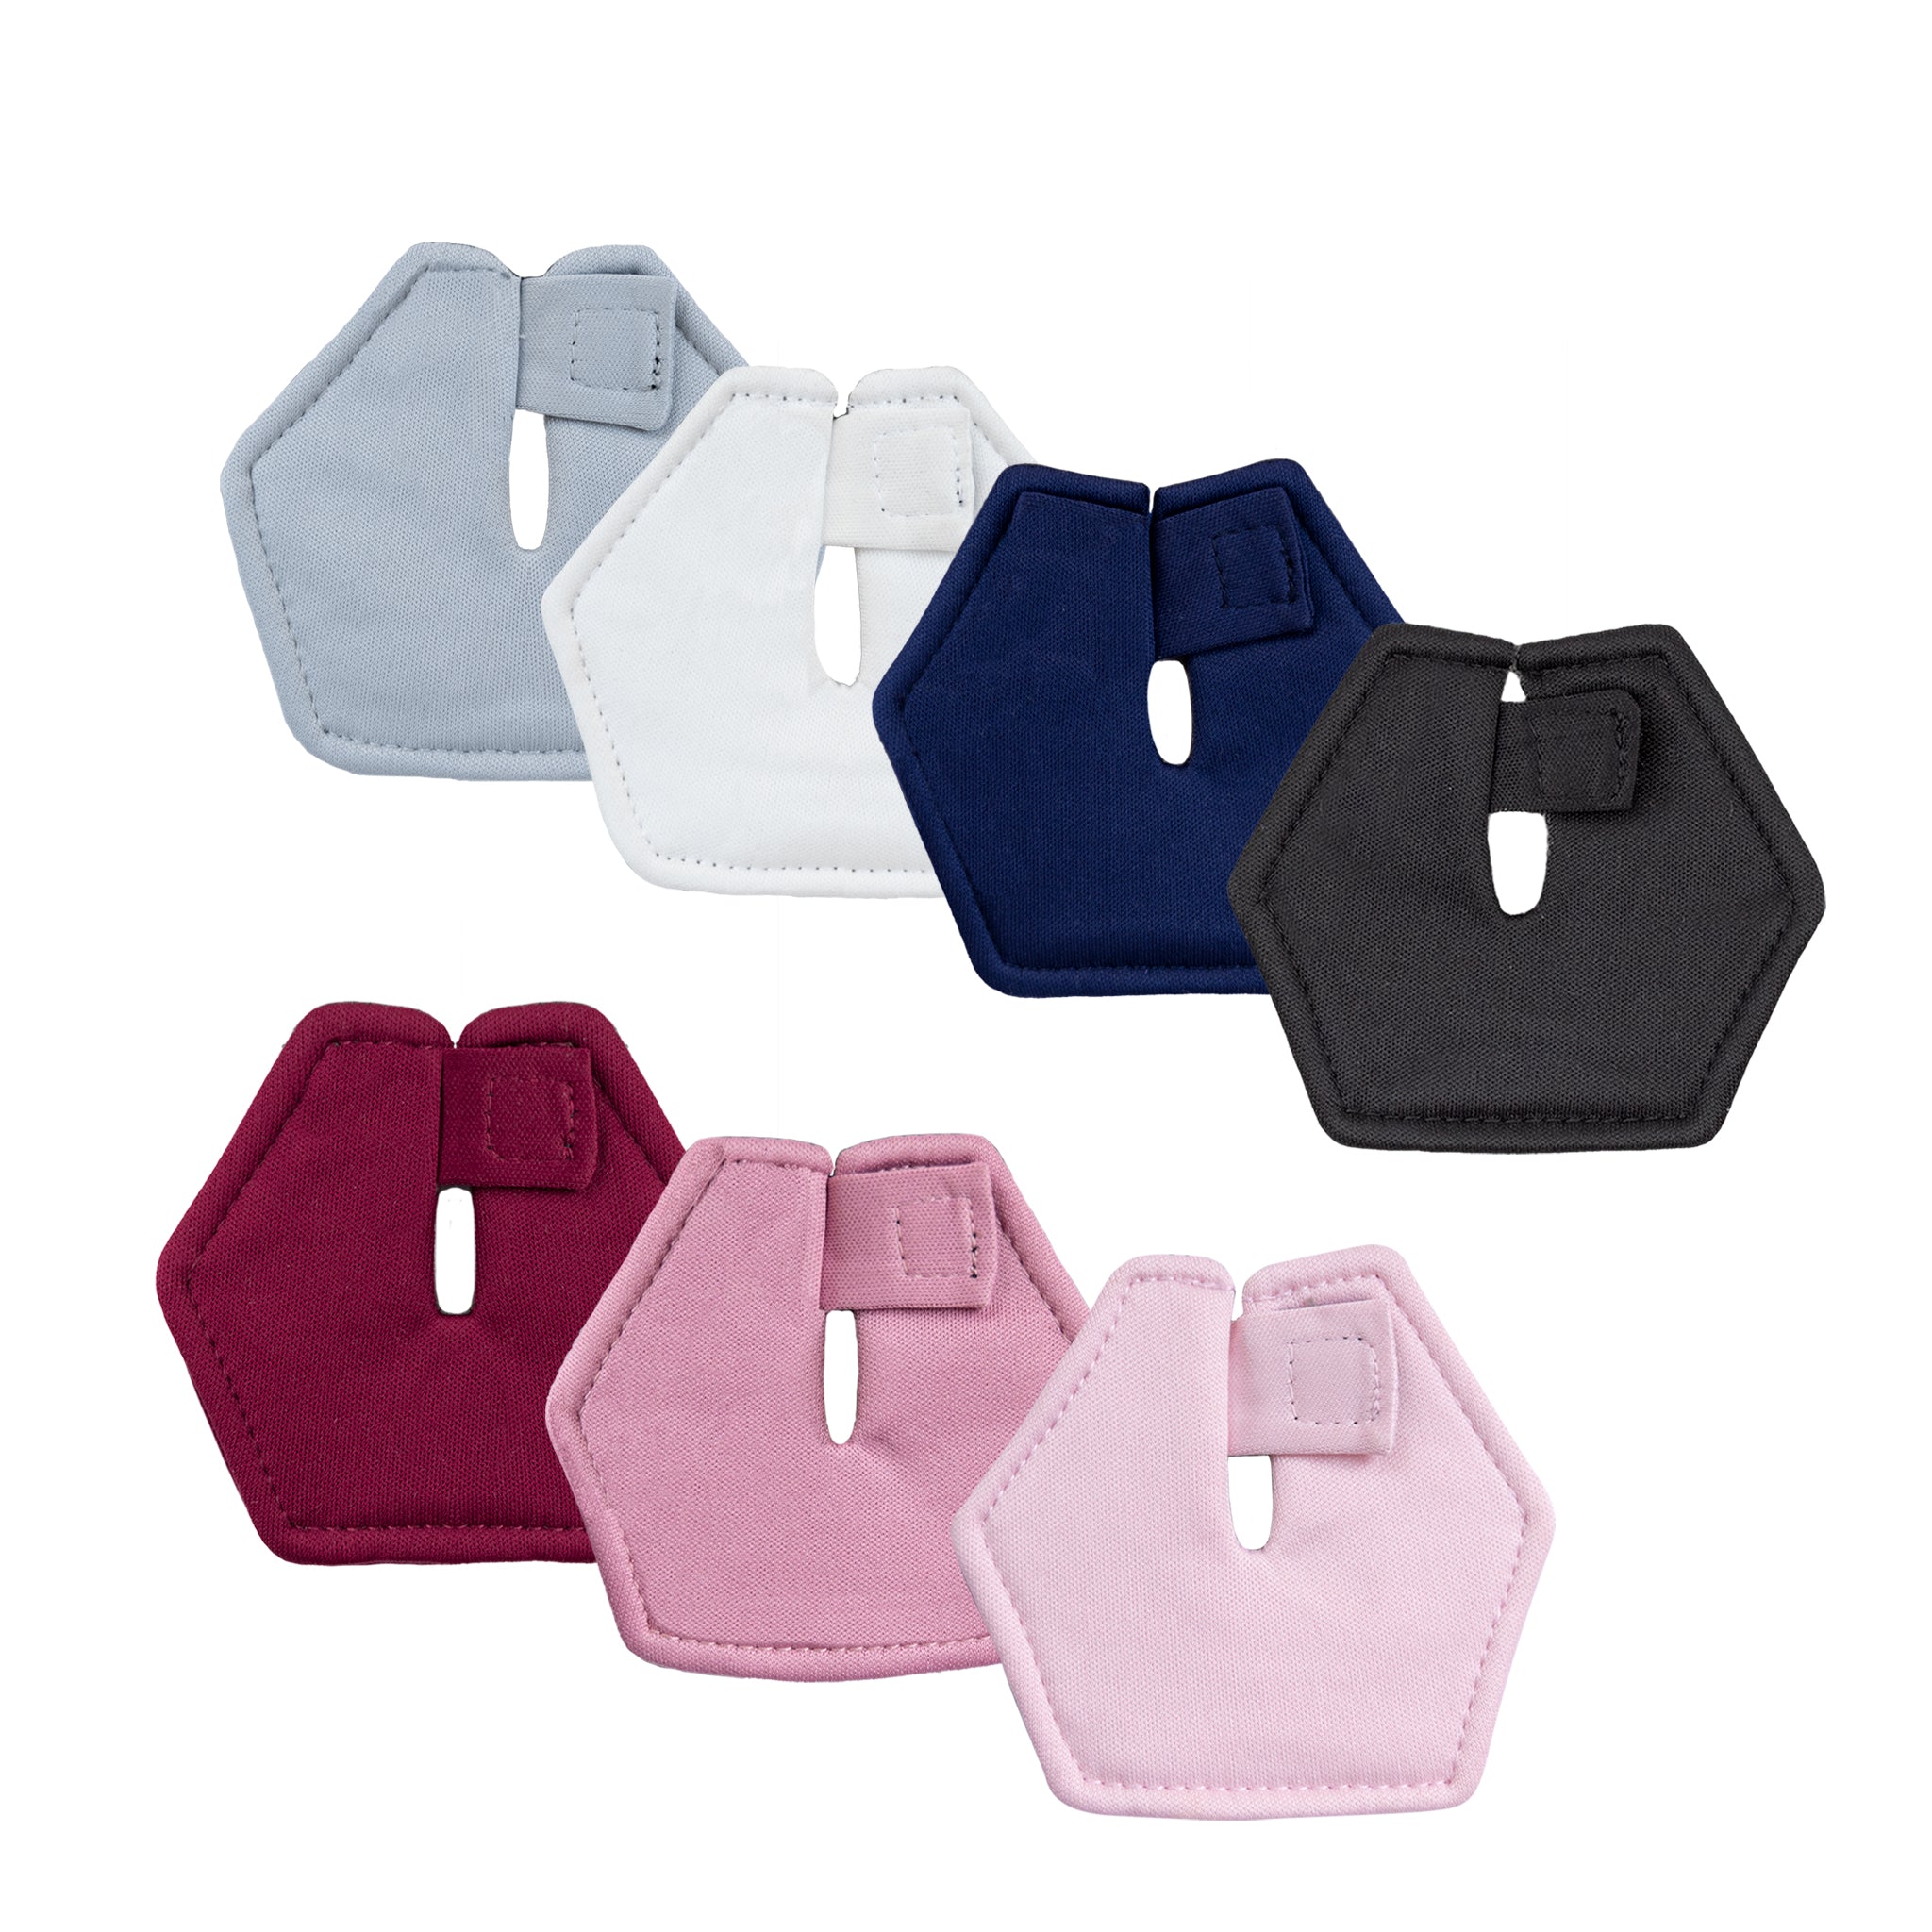 G-Tube Pads (7 day pack) Blues and Pinks